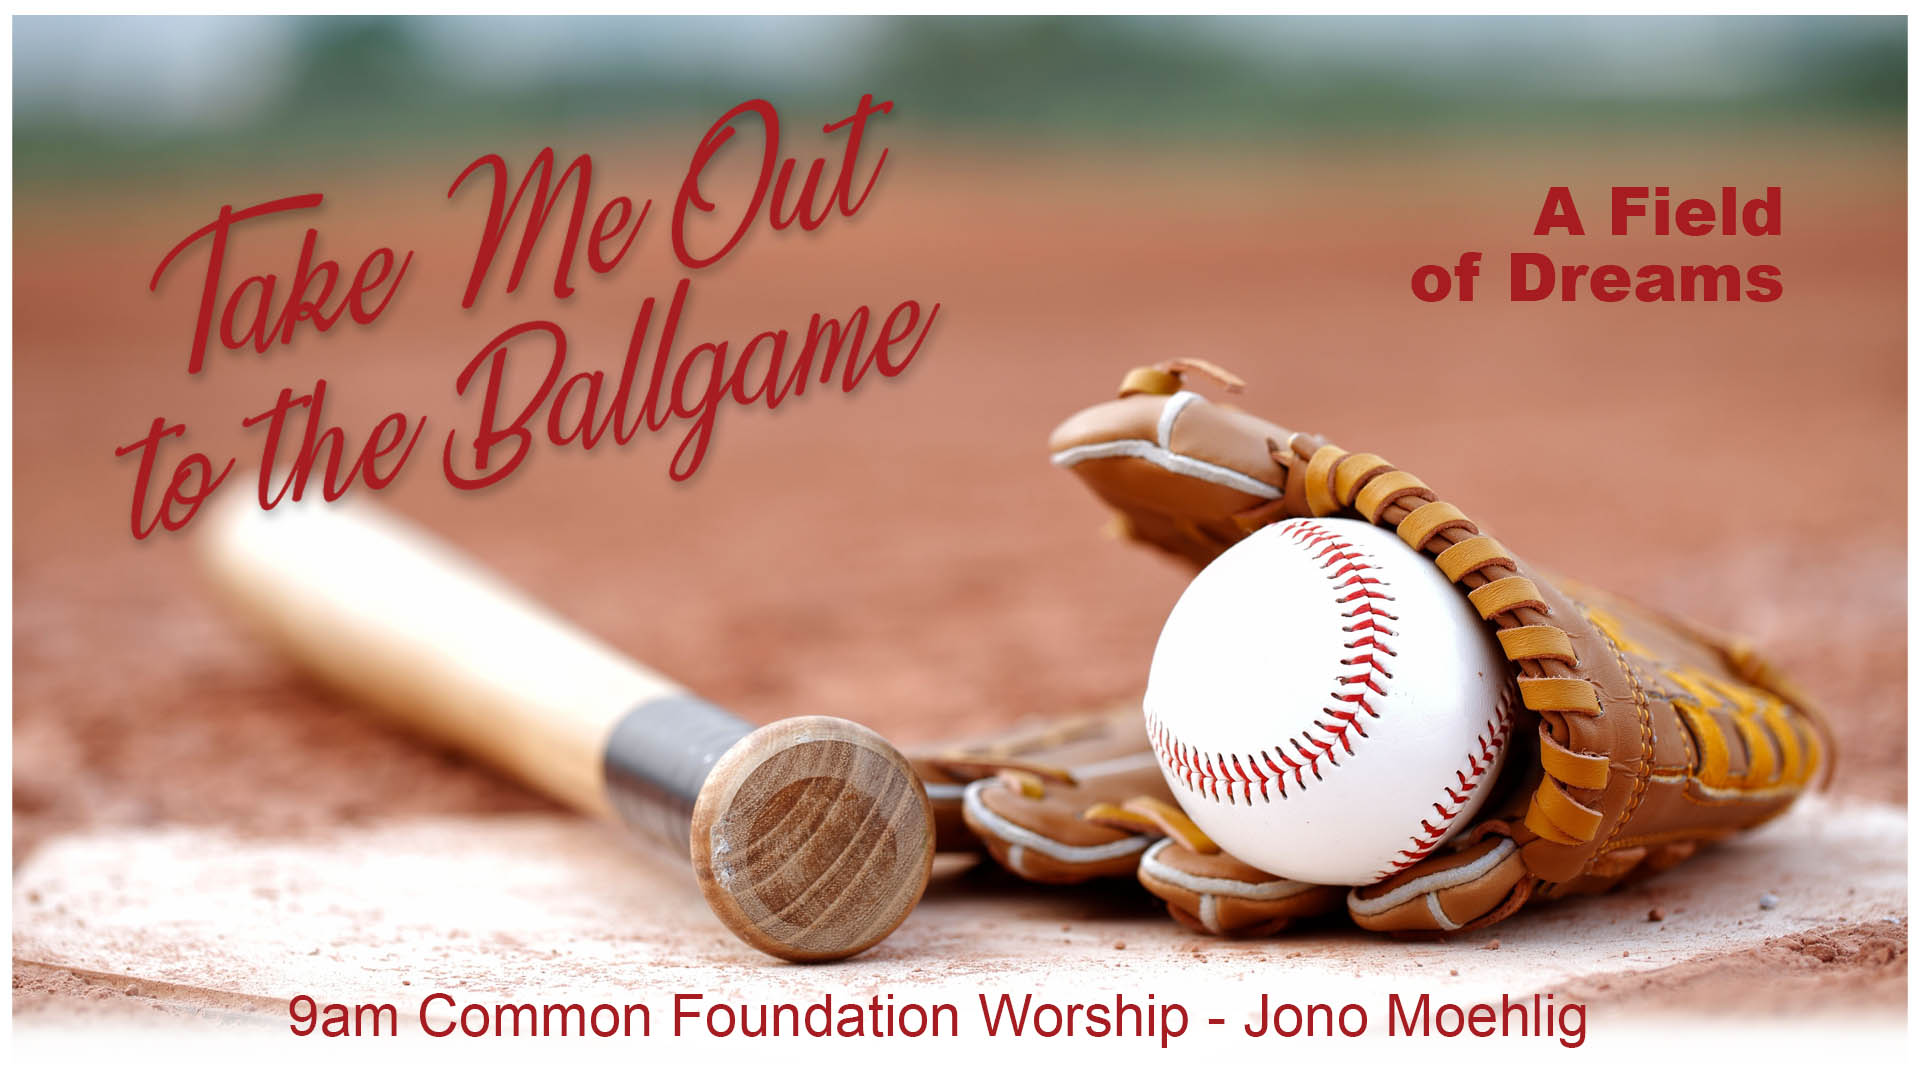 Take Me Out to the Ballgame: A Field of Dreams (Common Foundation)